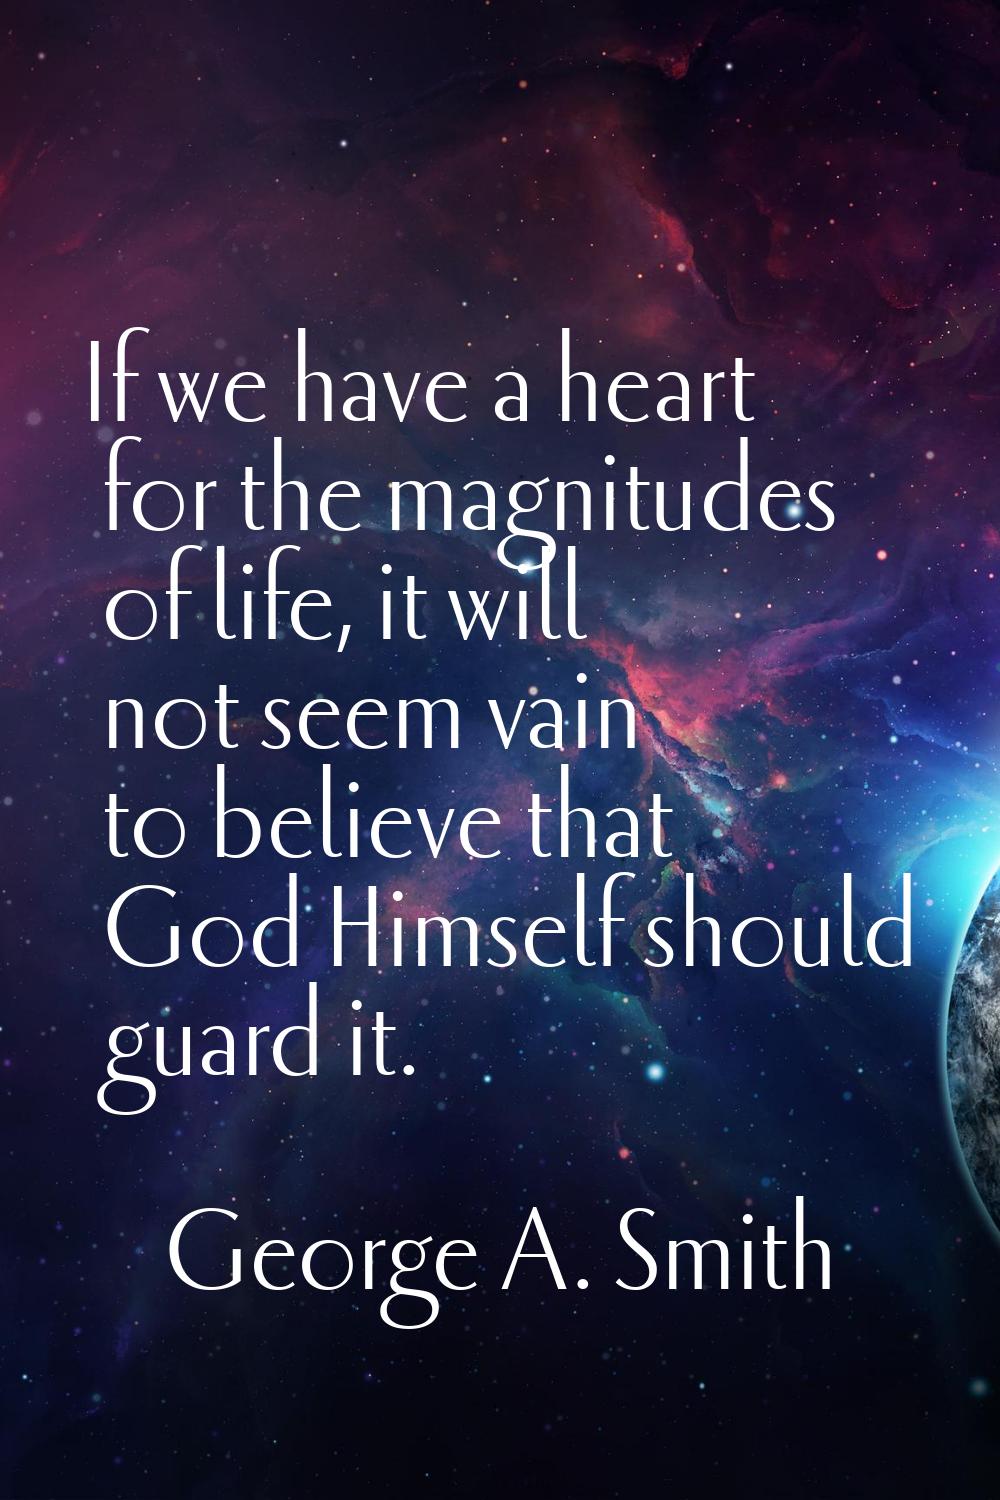 If we have a heart for the magnitudes of life, it will not seem vain to believe that God Himself sh